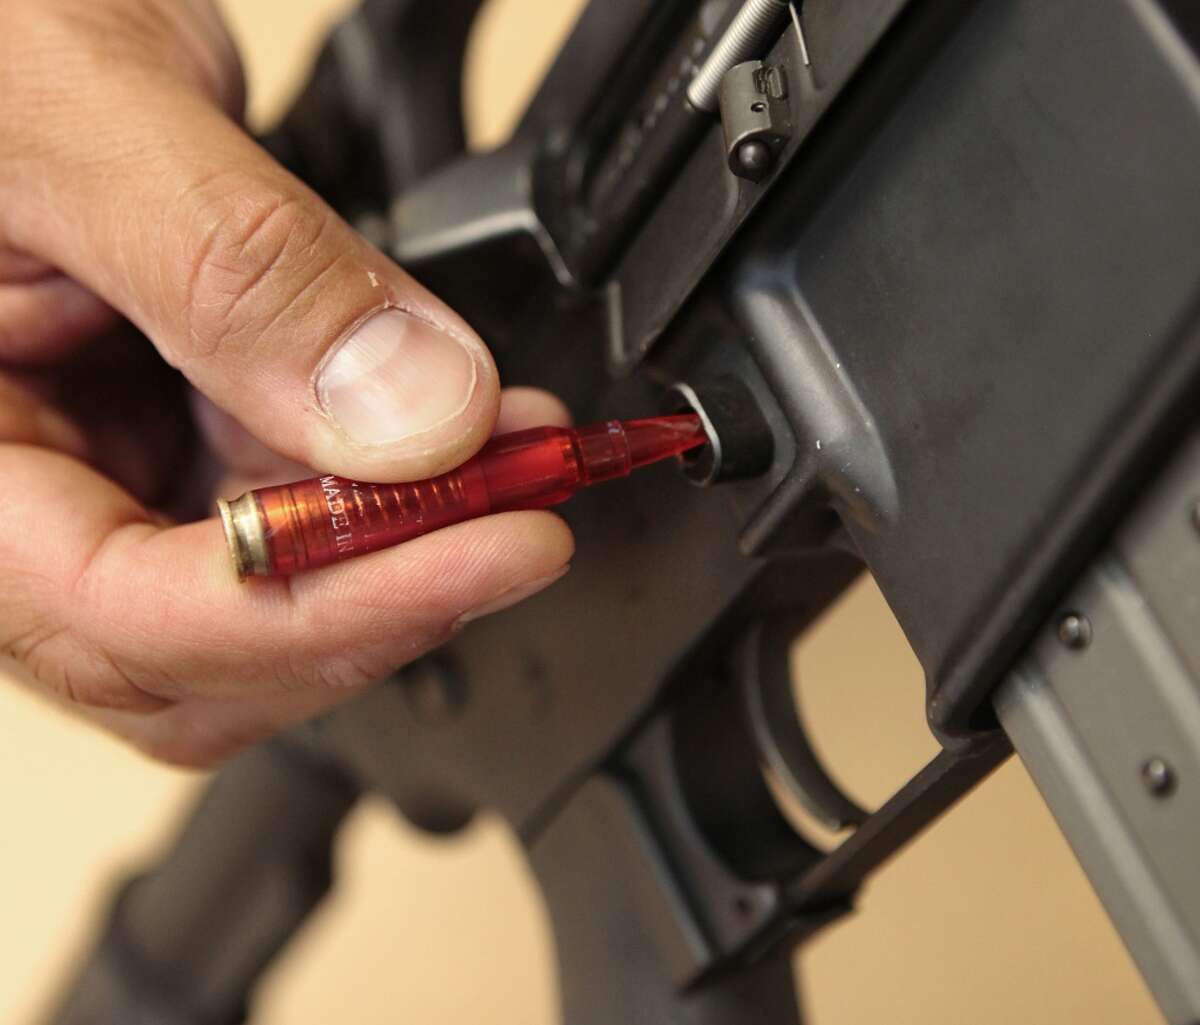 In this file photo, a plastic replica of a bullet is used to quickly remove a ammunition magazine from an assault rifle in a demonstration at the California Department of Justice in Sacramento.